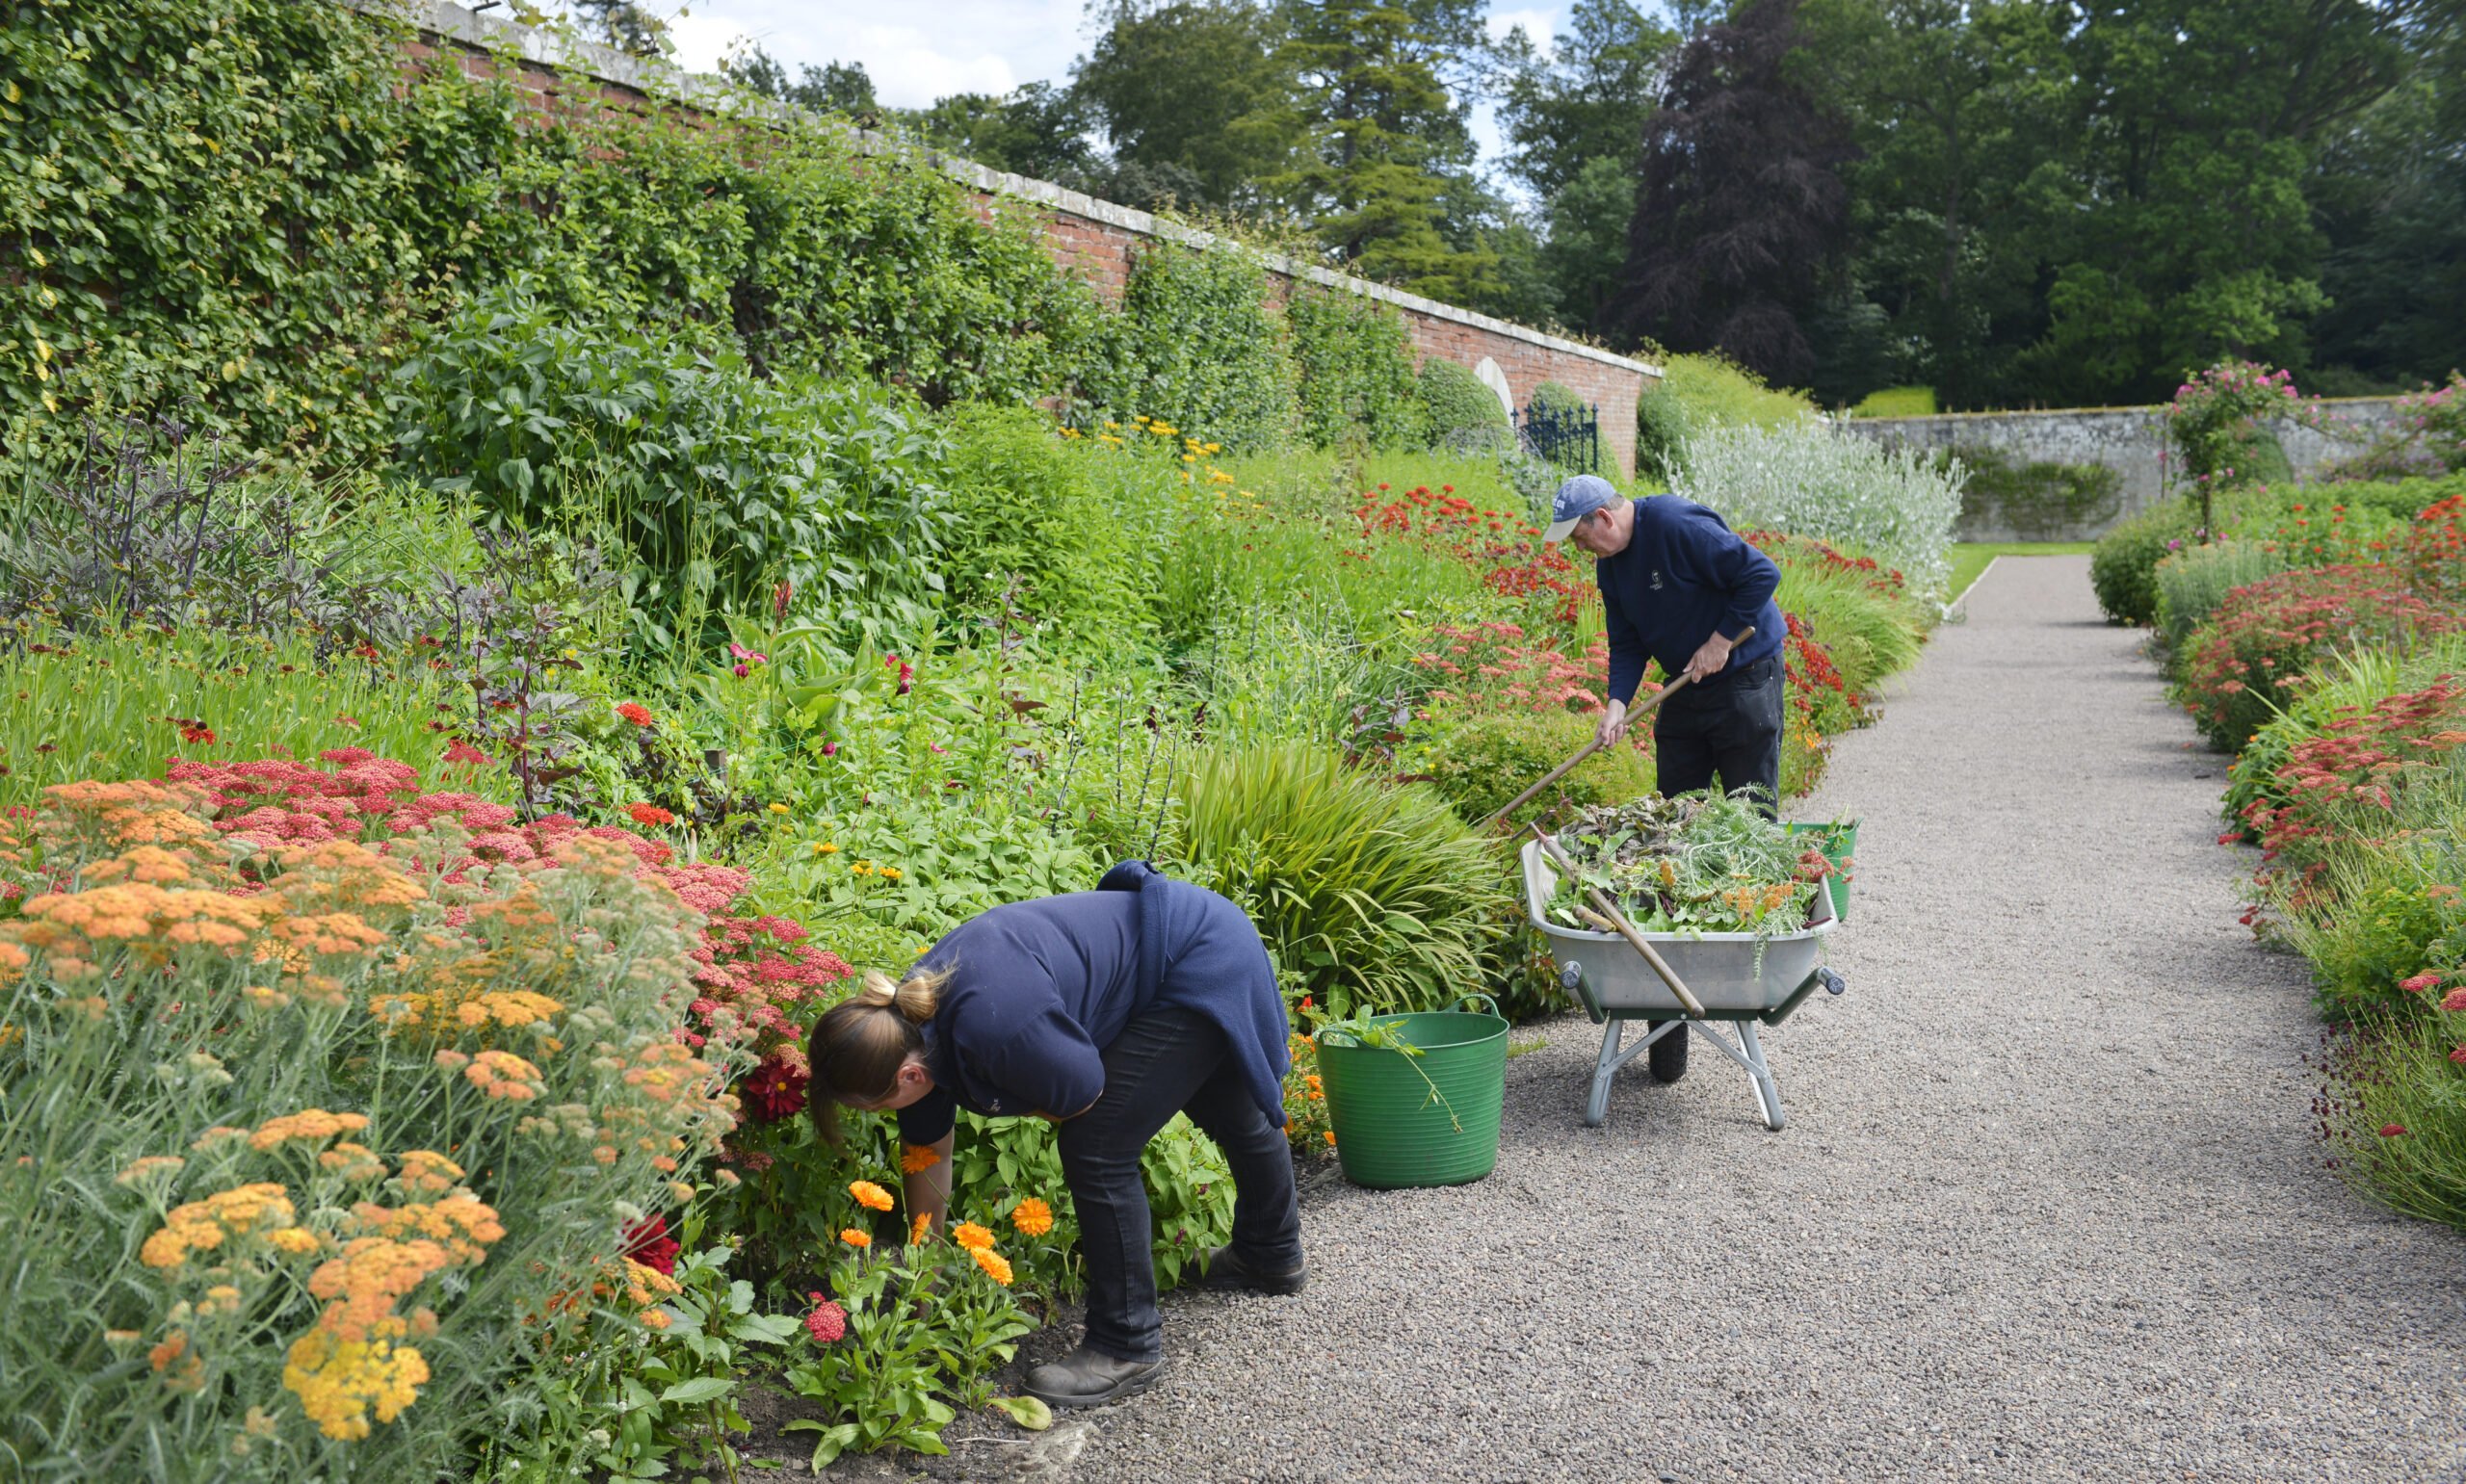 Become a Volunteer with Floors Castle Walled Gardens